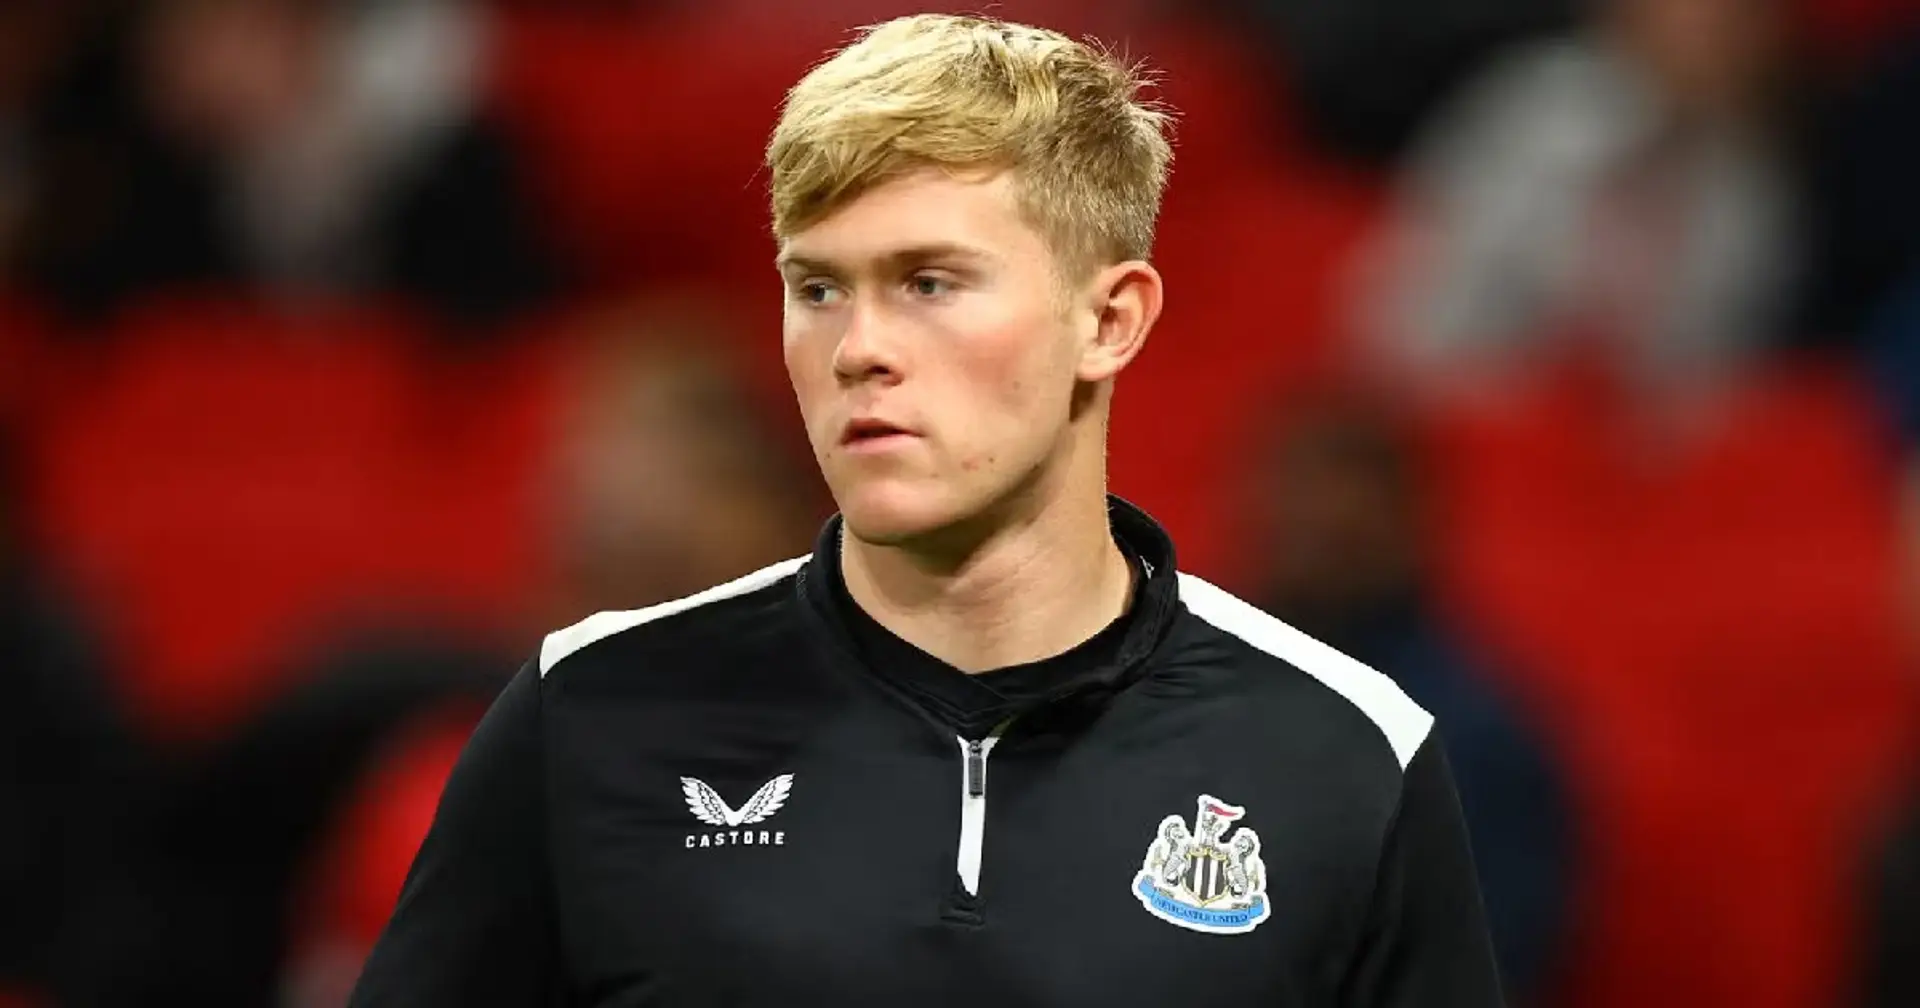 'The future looks really good': Chelsea loanee Lewis Hall reacts as Newcastle move set to become permanent